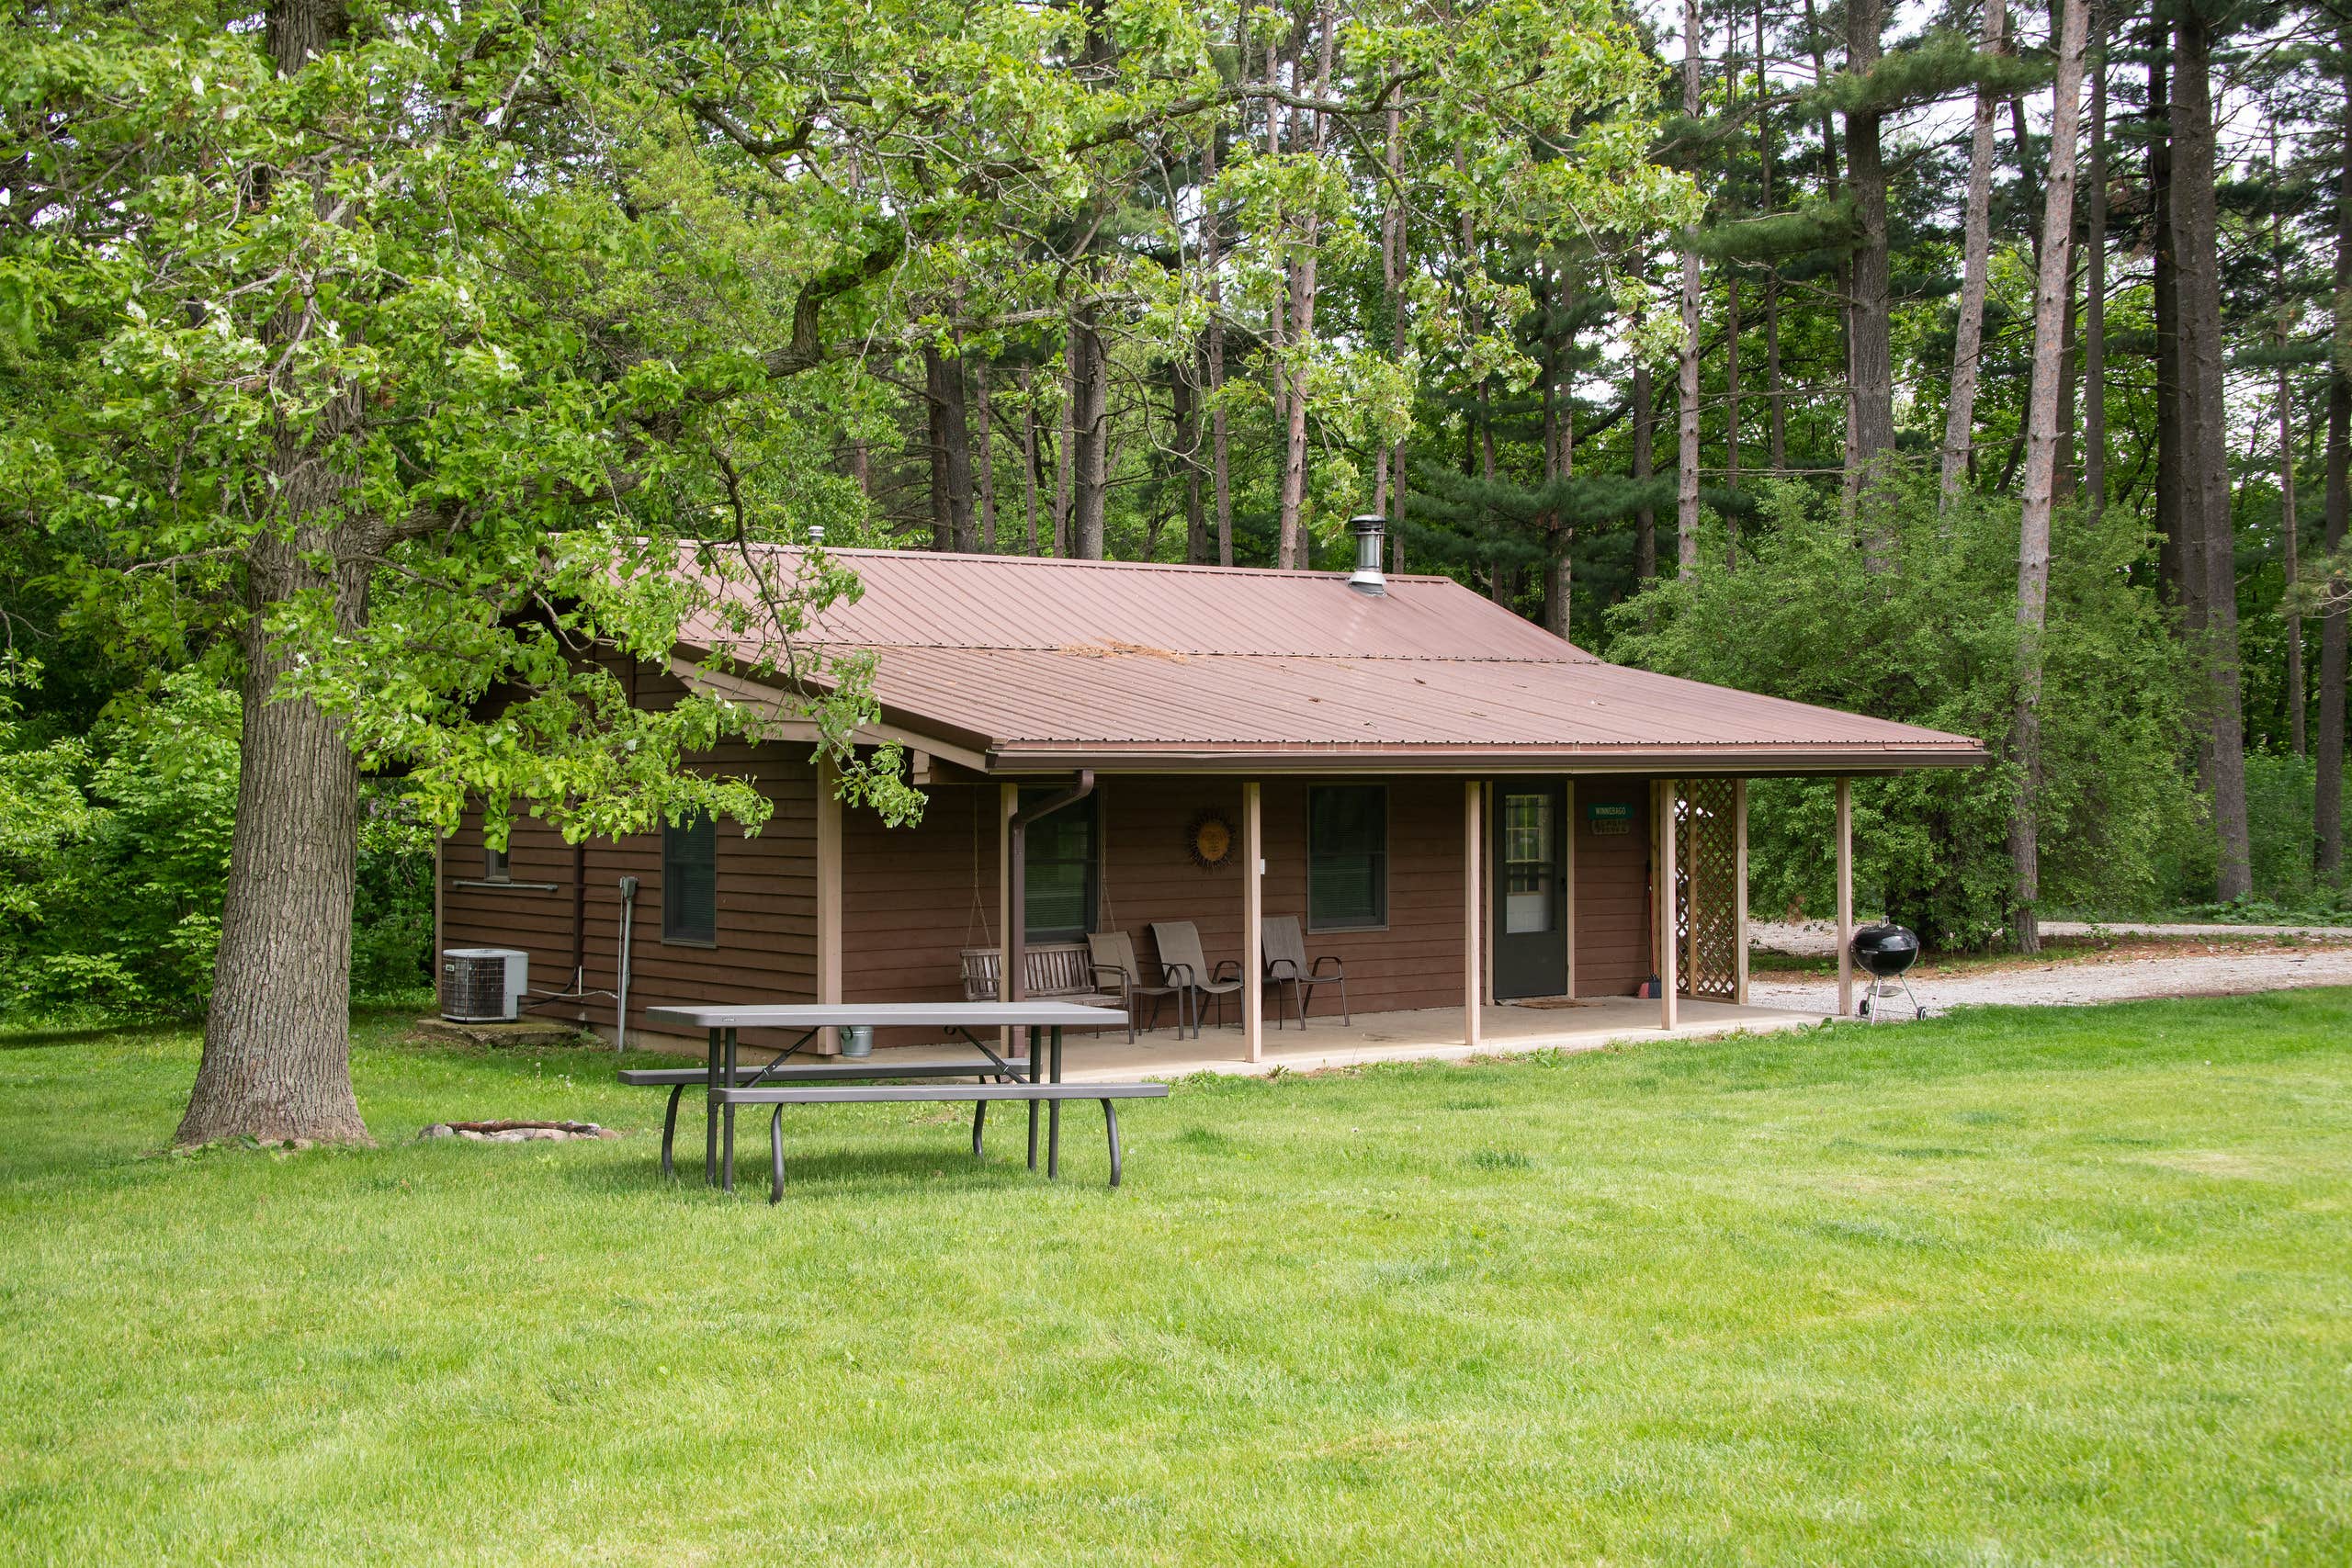 Pleasant Creek Campground RV Park - Oglesby, IL 61348 - AreaGuides